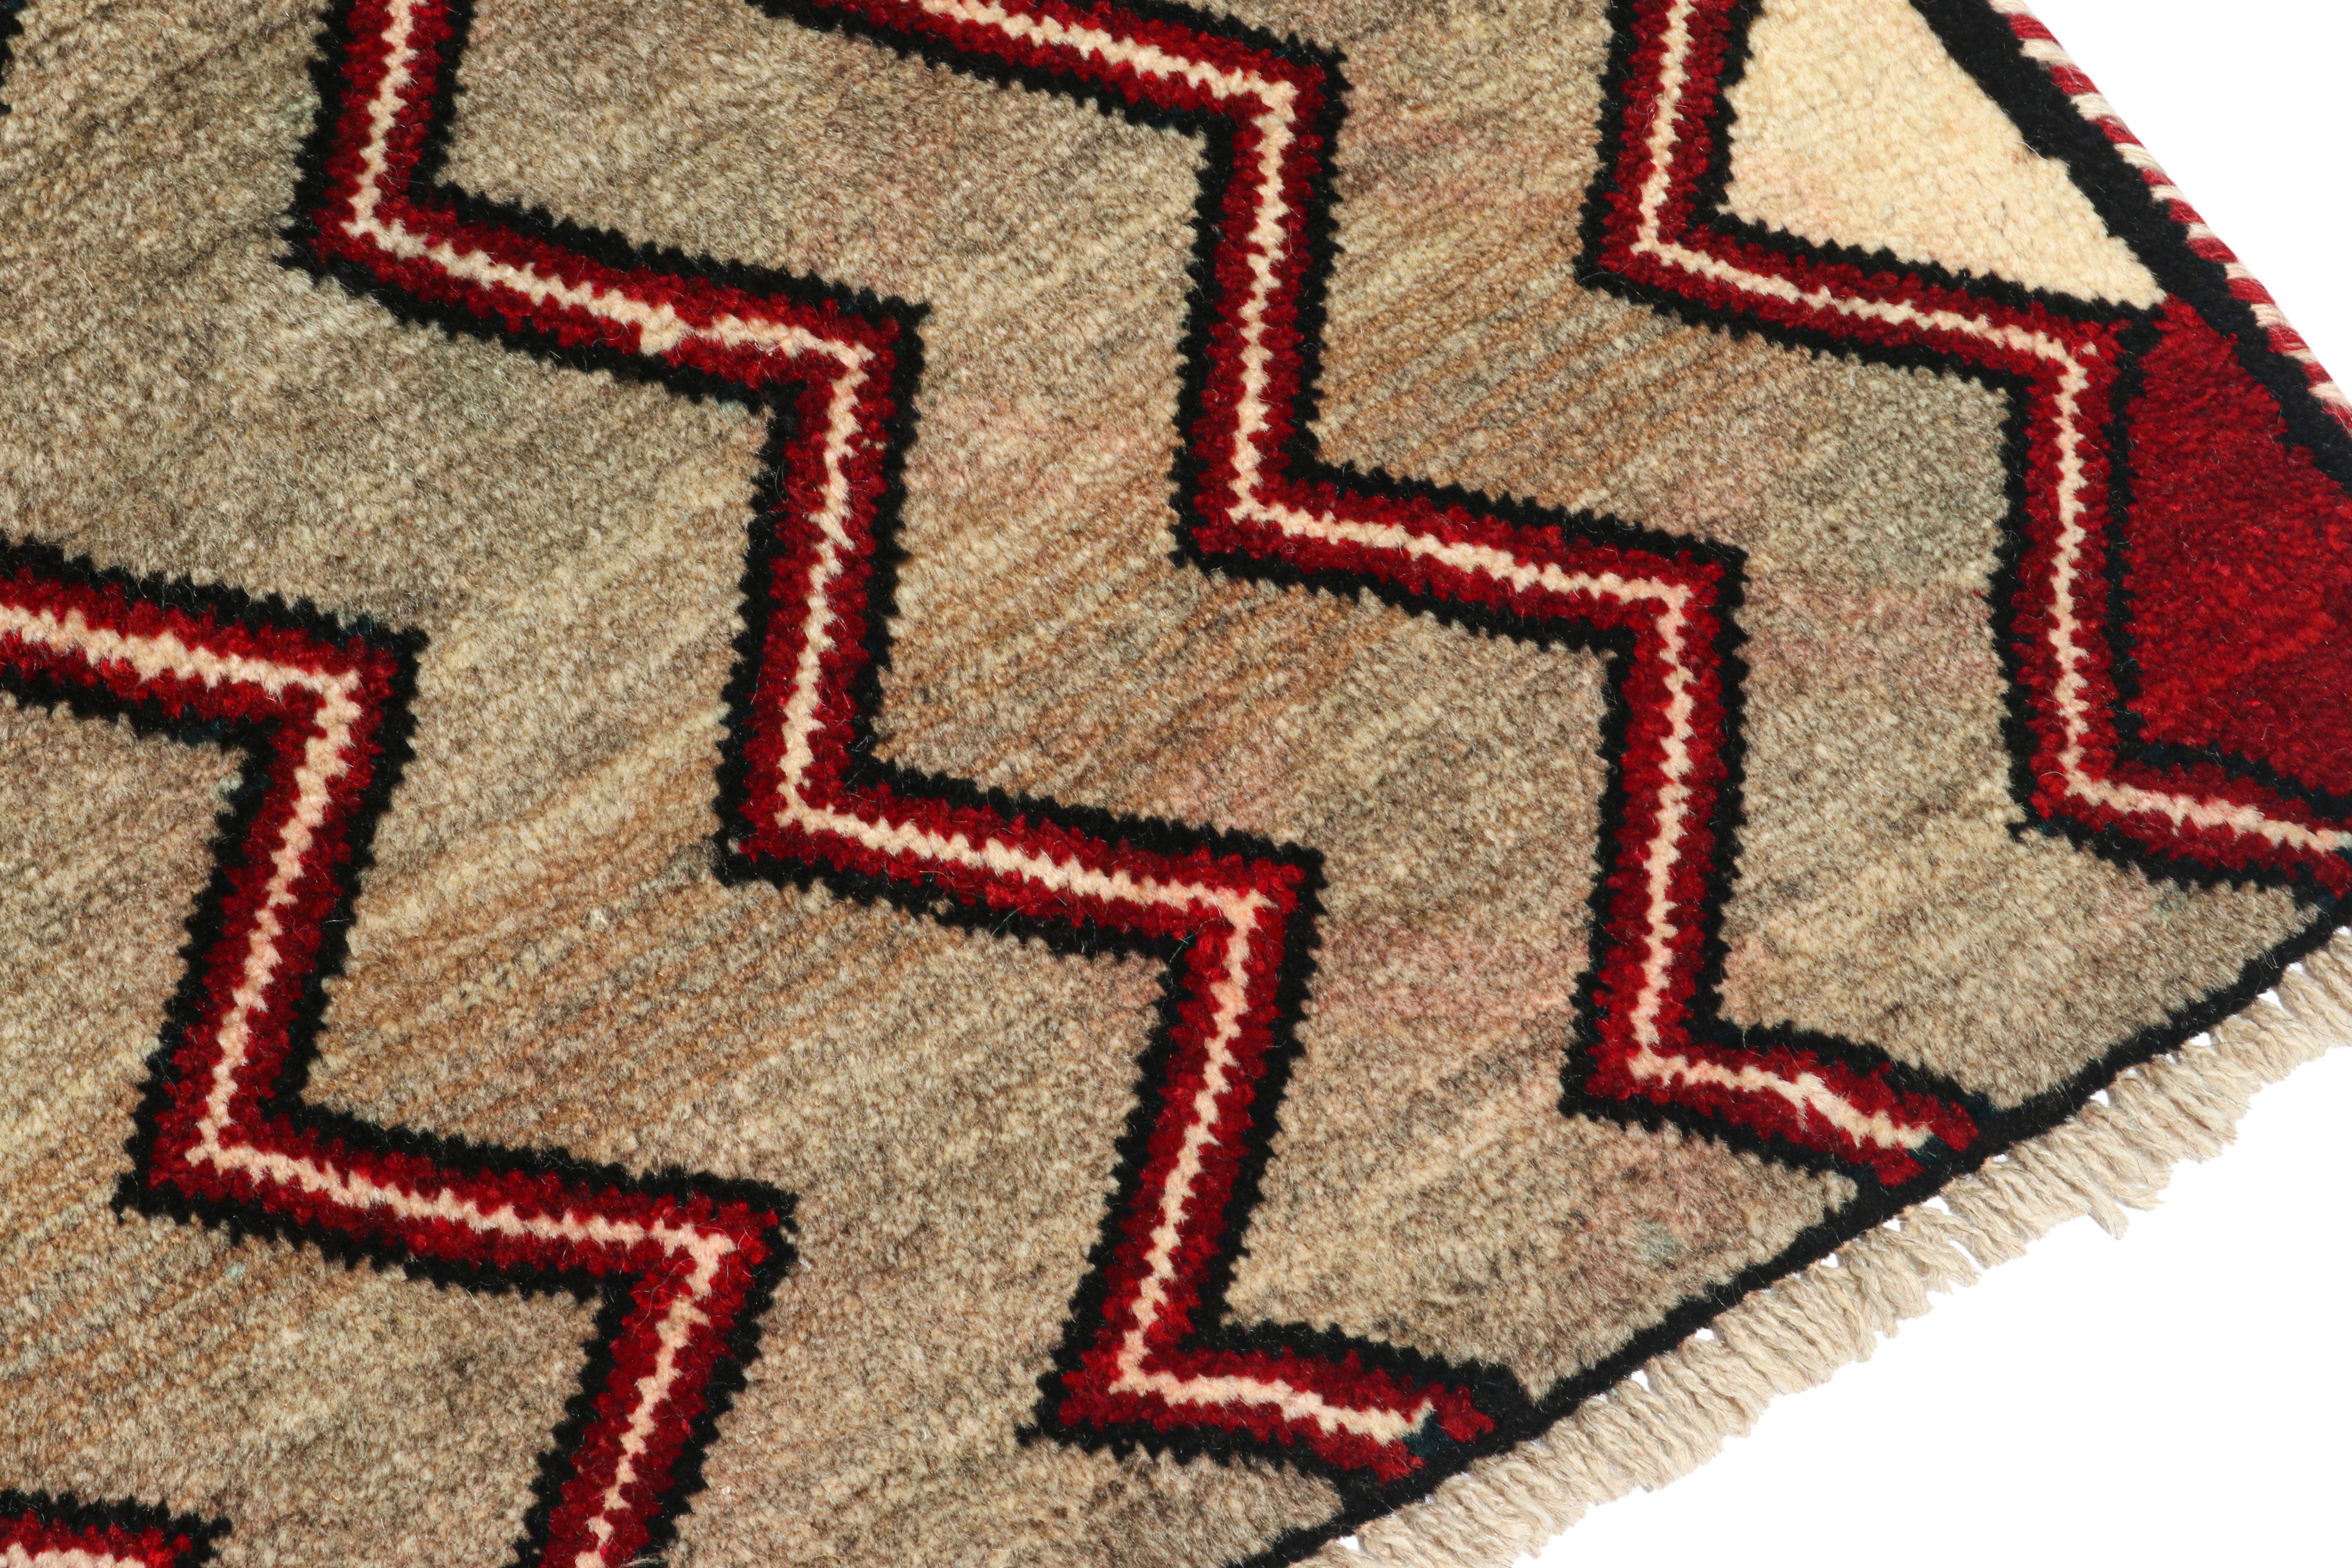 Vintage Gabbeh Tribal Rug in Beige-Brown and Red Chevron Patterns by Rug & Kilim In Good Condition For Sale In Long Island City, NY